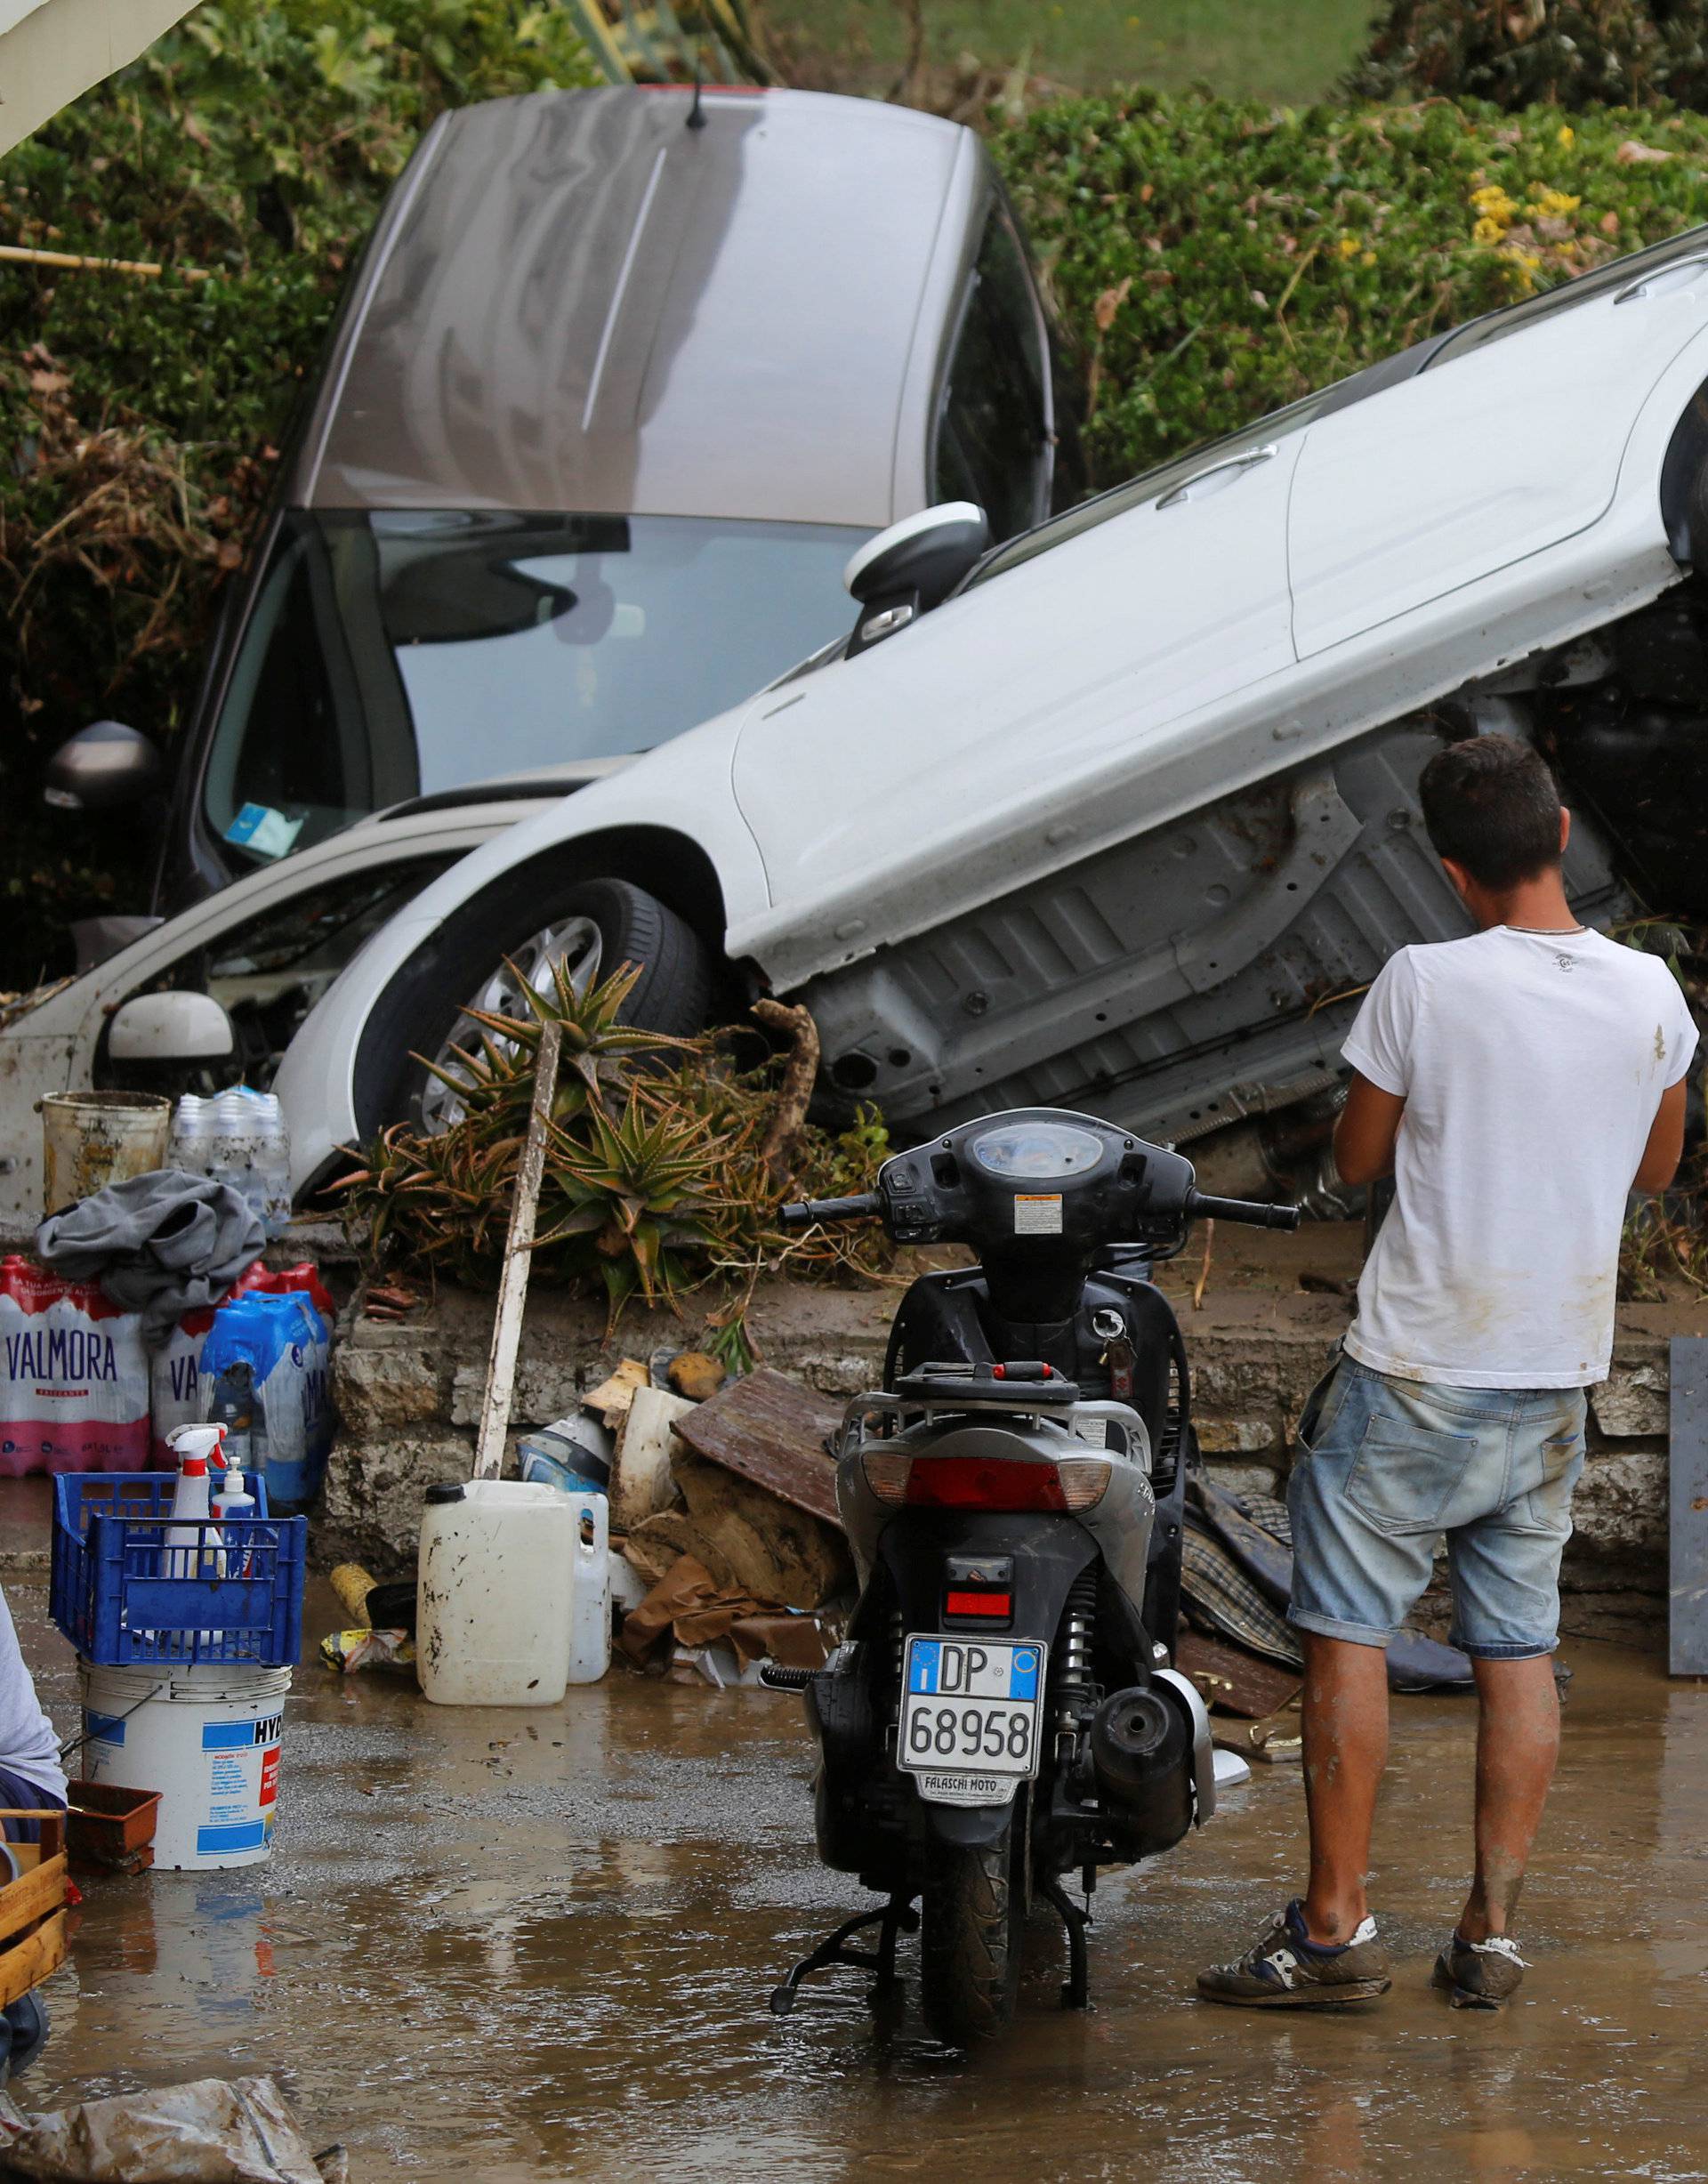 A man looks at damaged cars following floods in Livorno